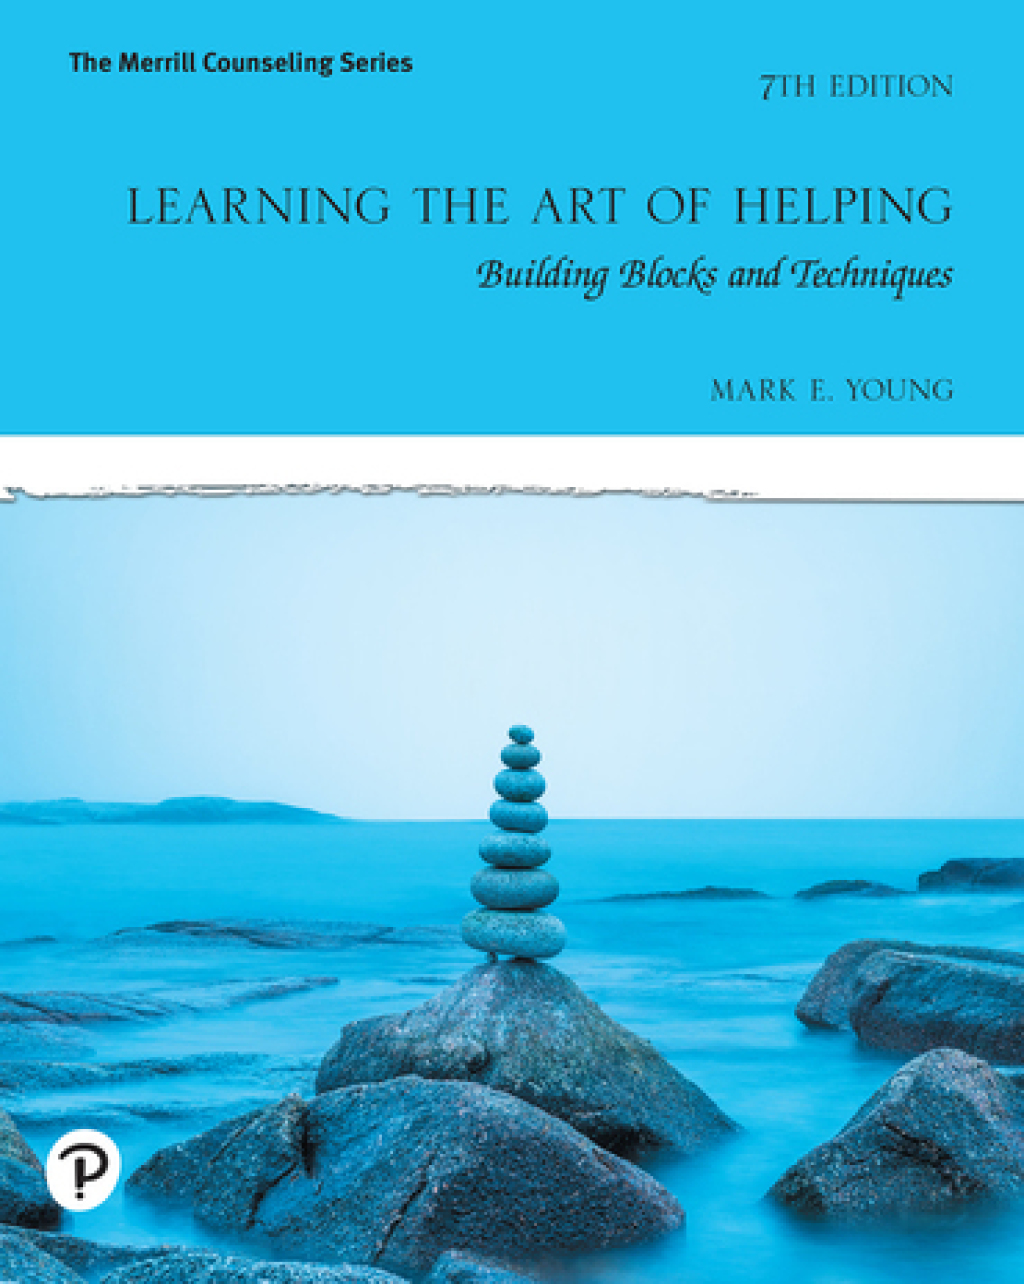 Learning the Art of Helping: Building Blocks and Techniques [Book]